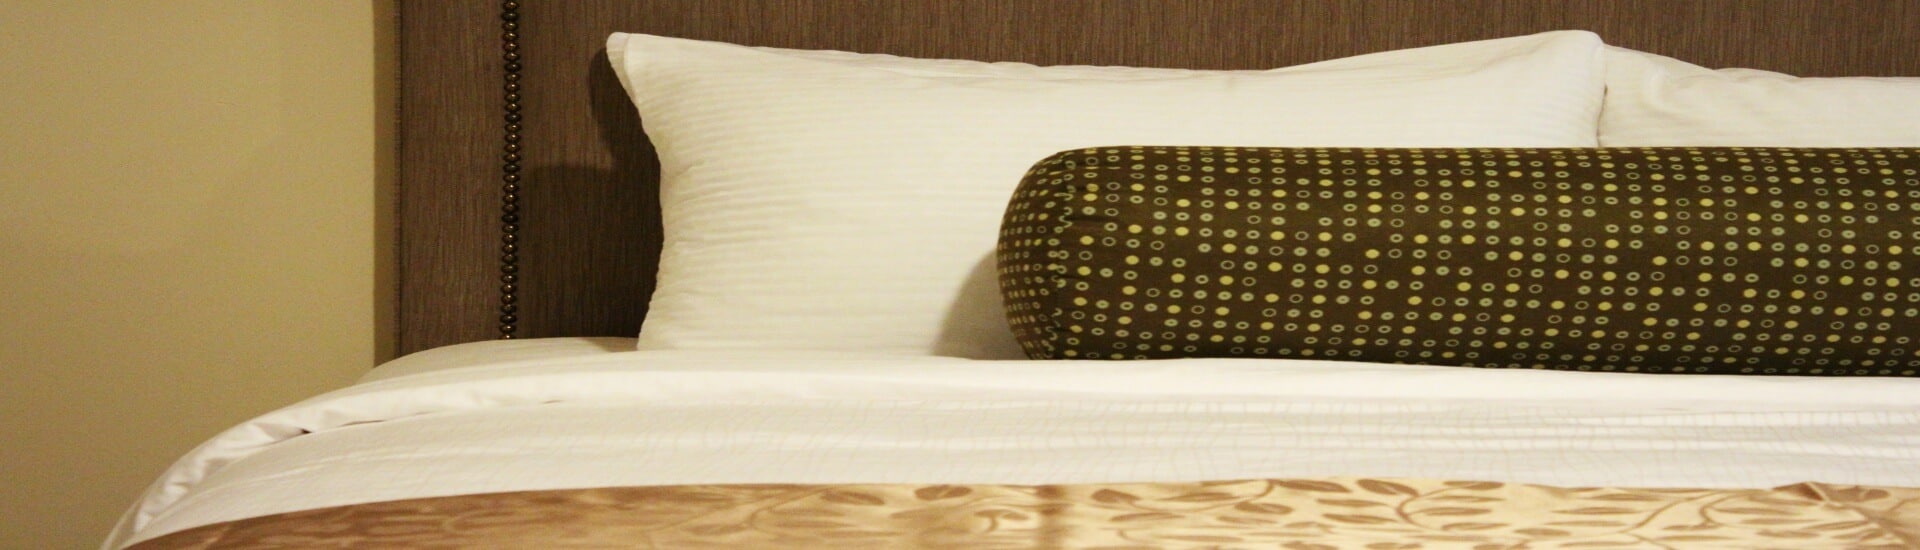 a bed with white and gold bedding, and a round brown pillow